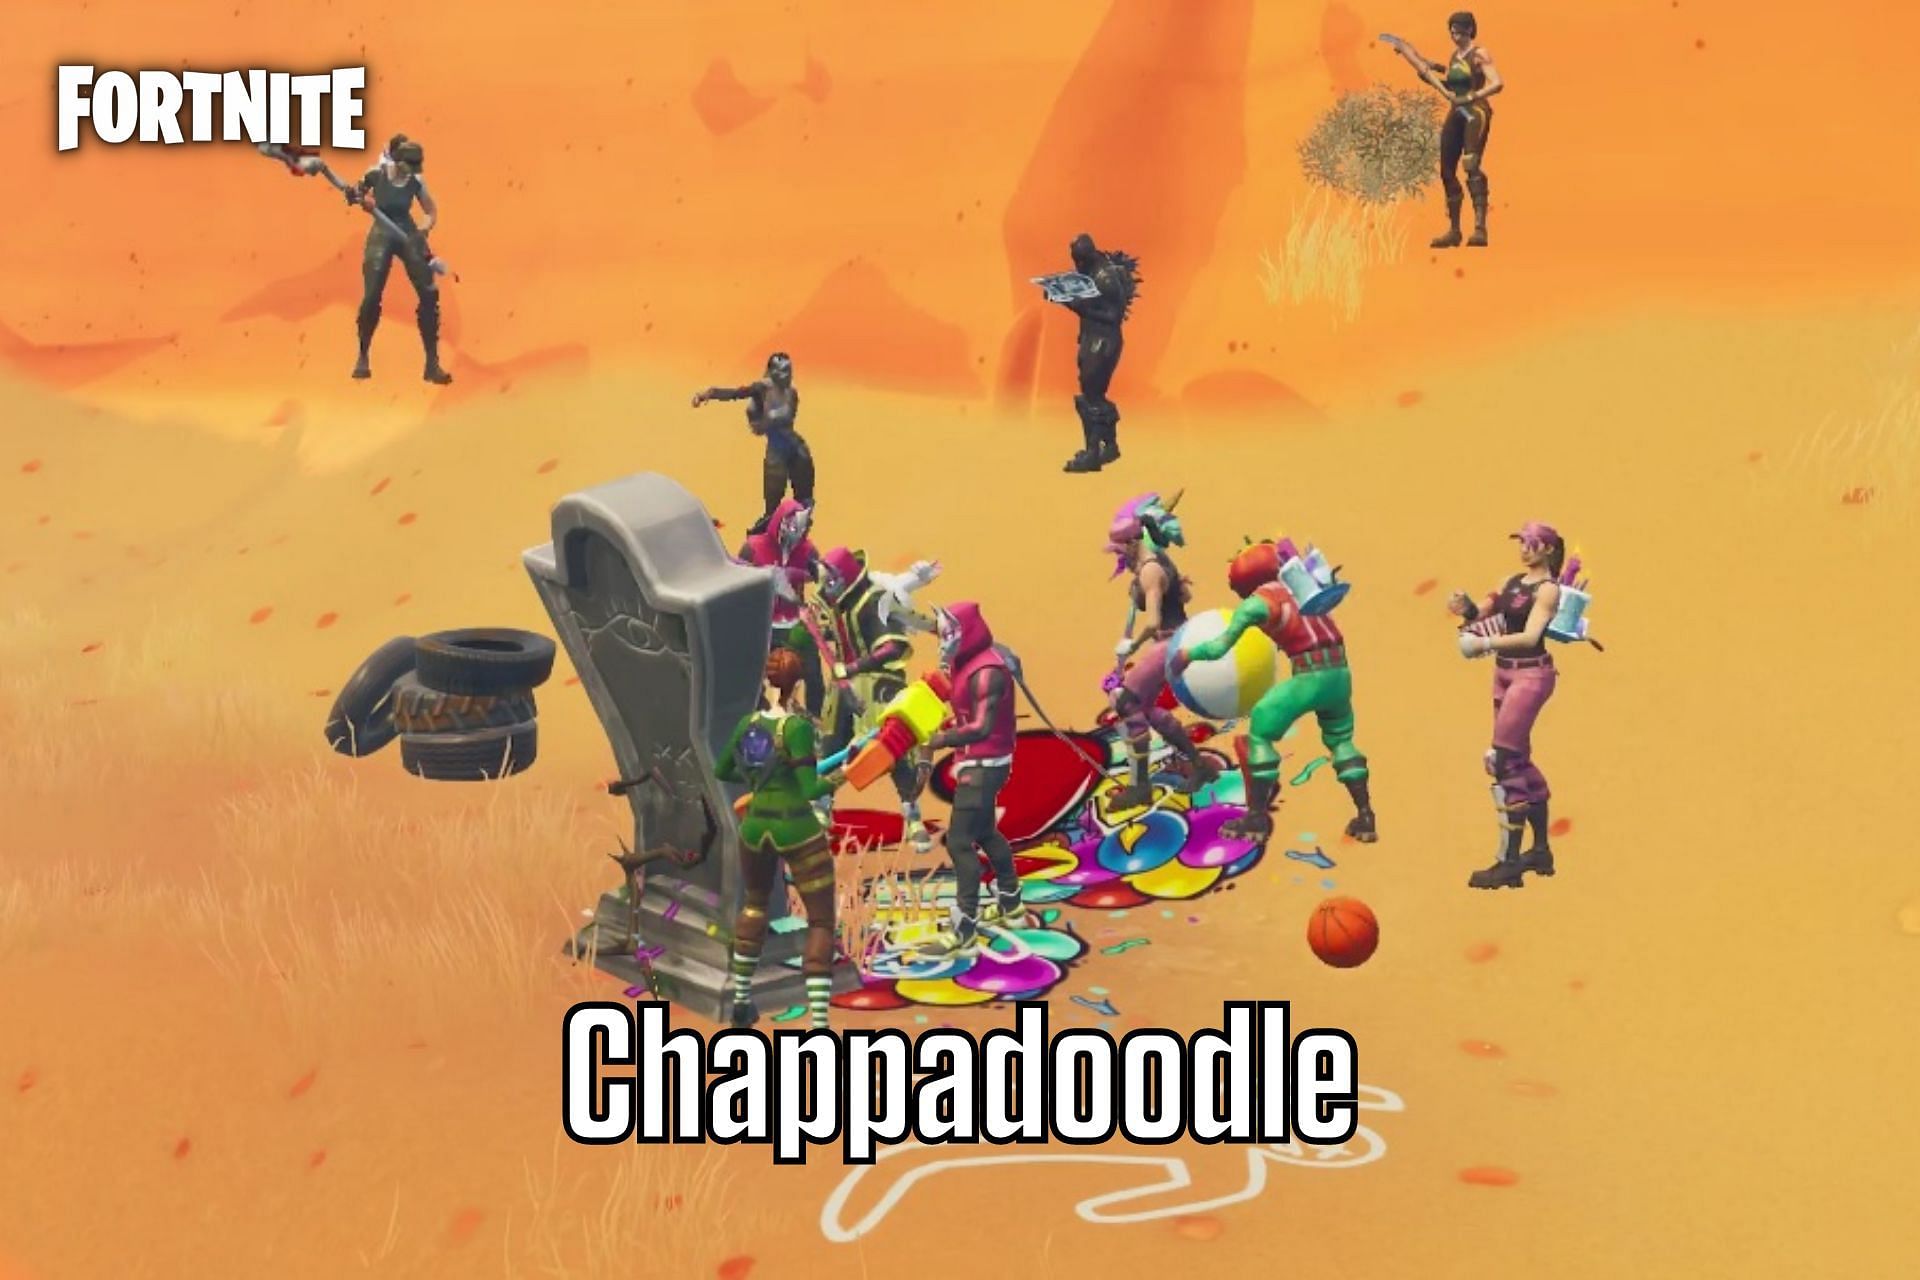 Chappadoodle was immortalized in Fortnite Chapter 1 with a grave stone (Image via Sportskeeda)